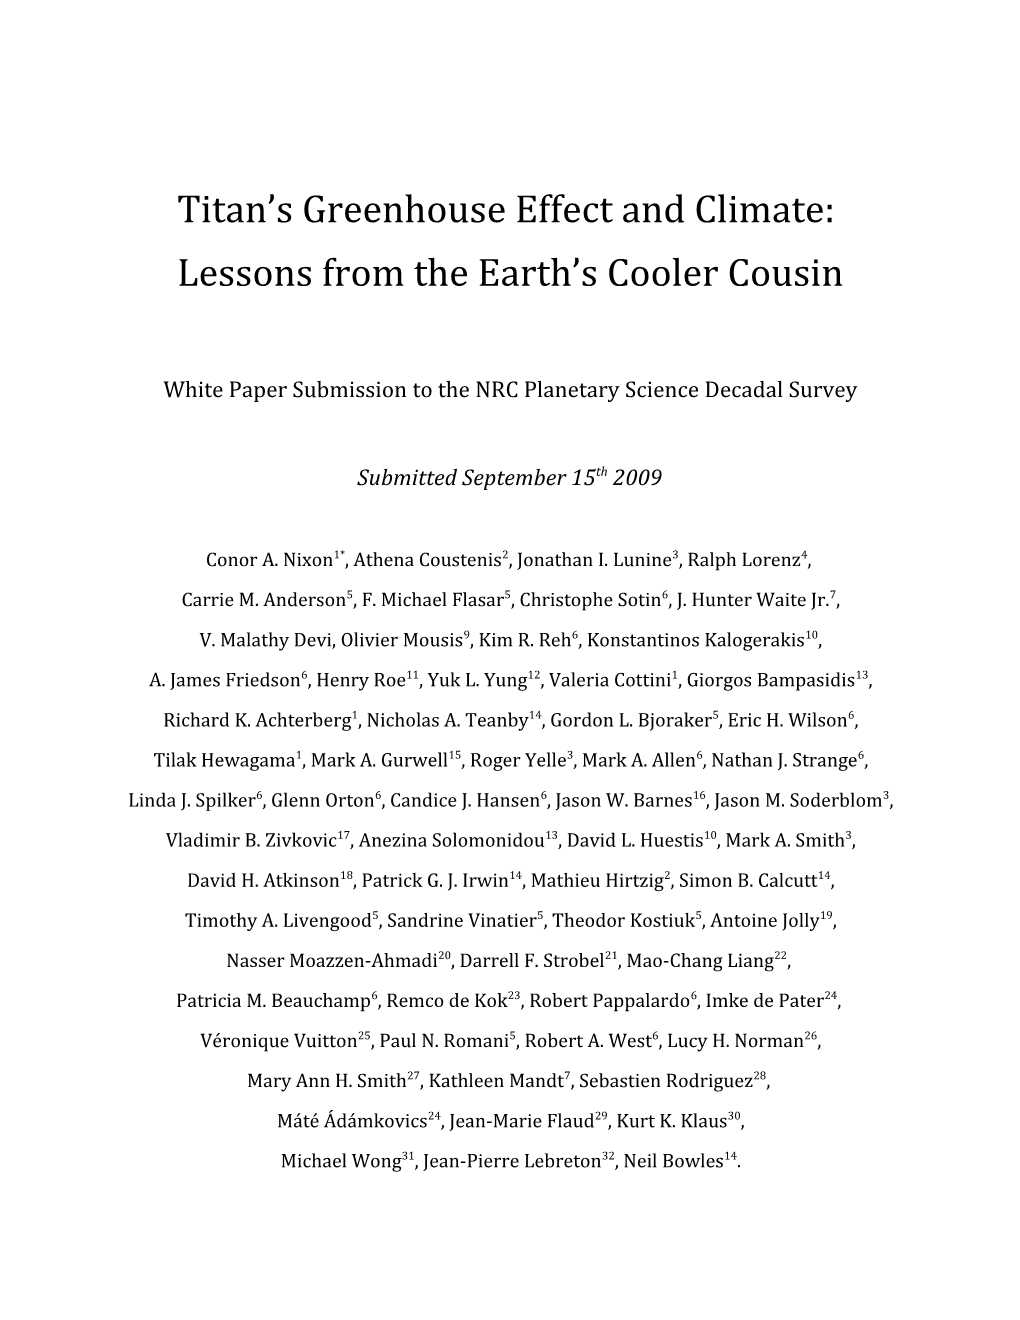 Titan S Greenhouse Effect and Climate